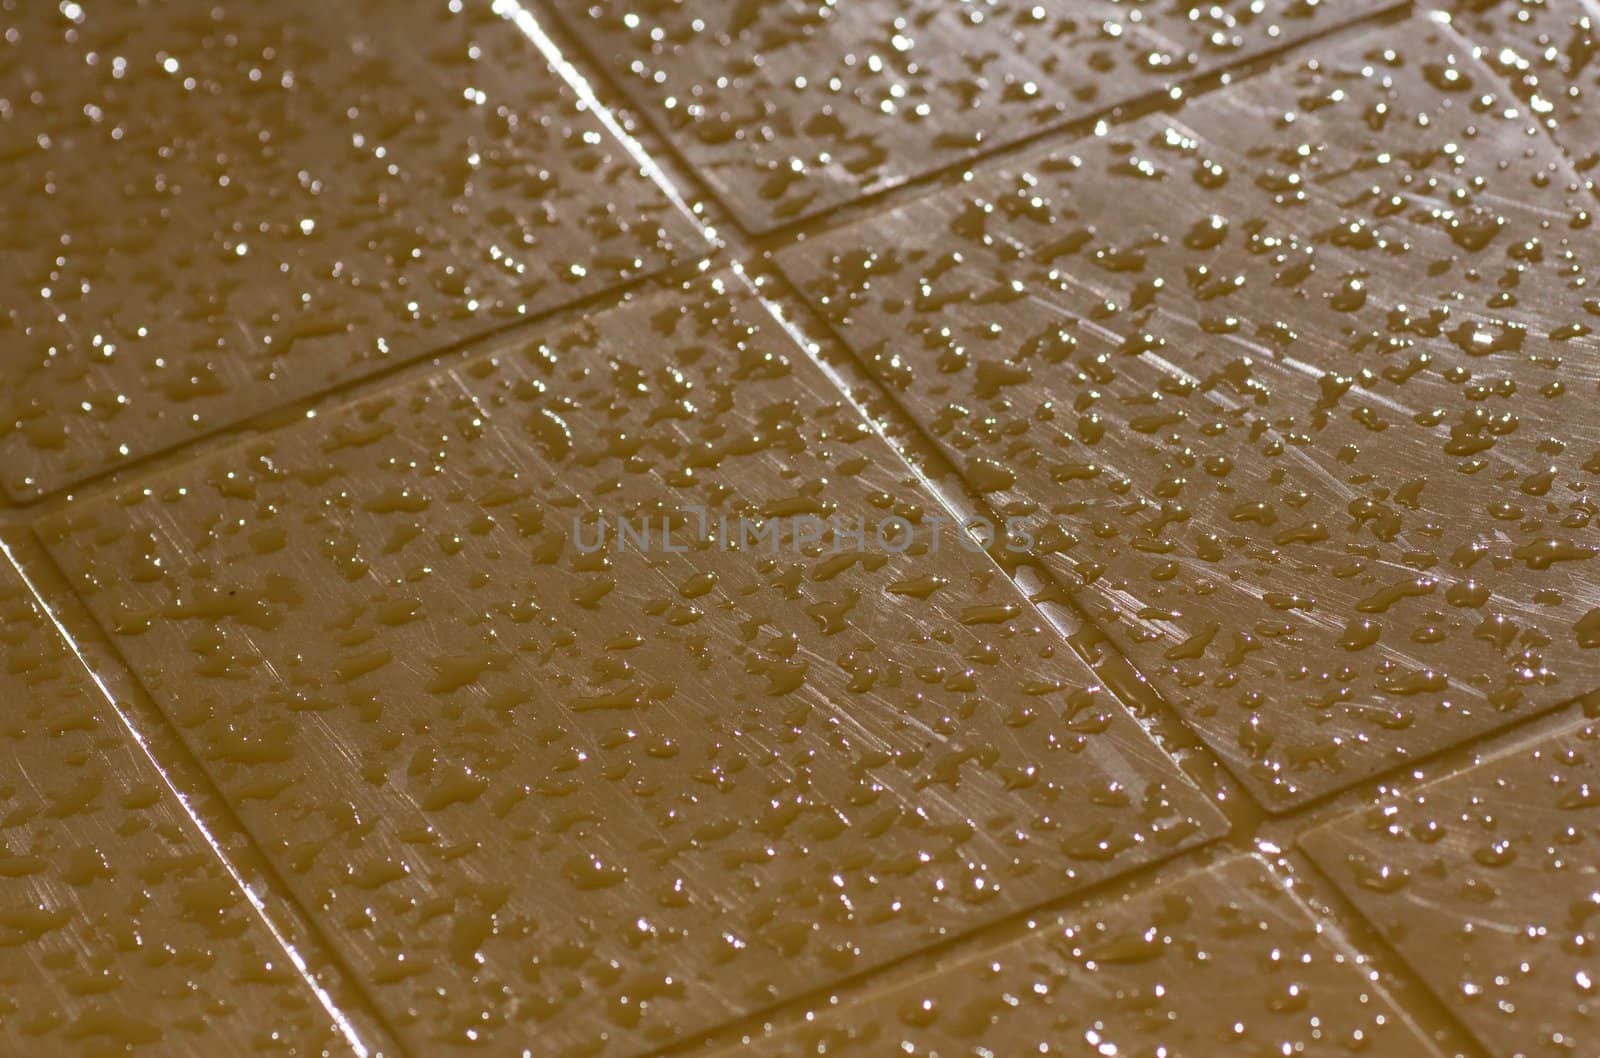 Water drops on yellow surface